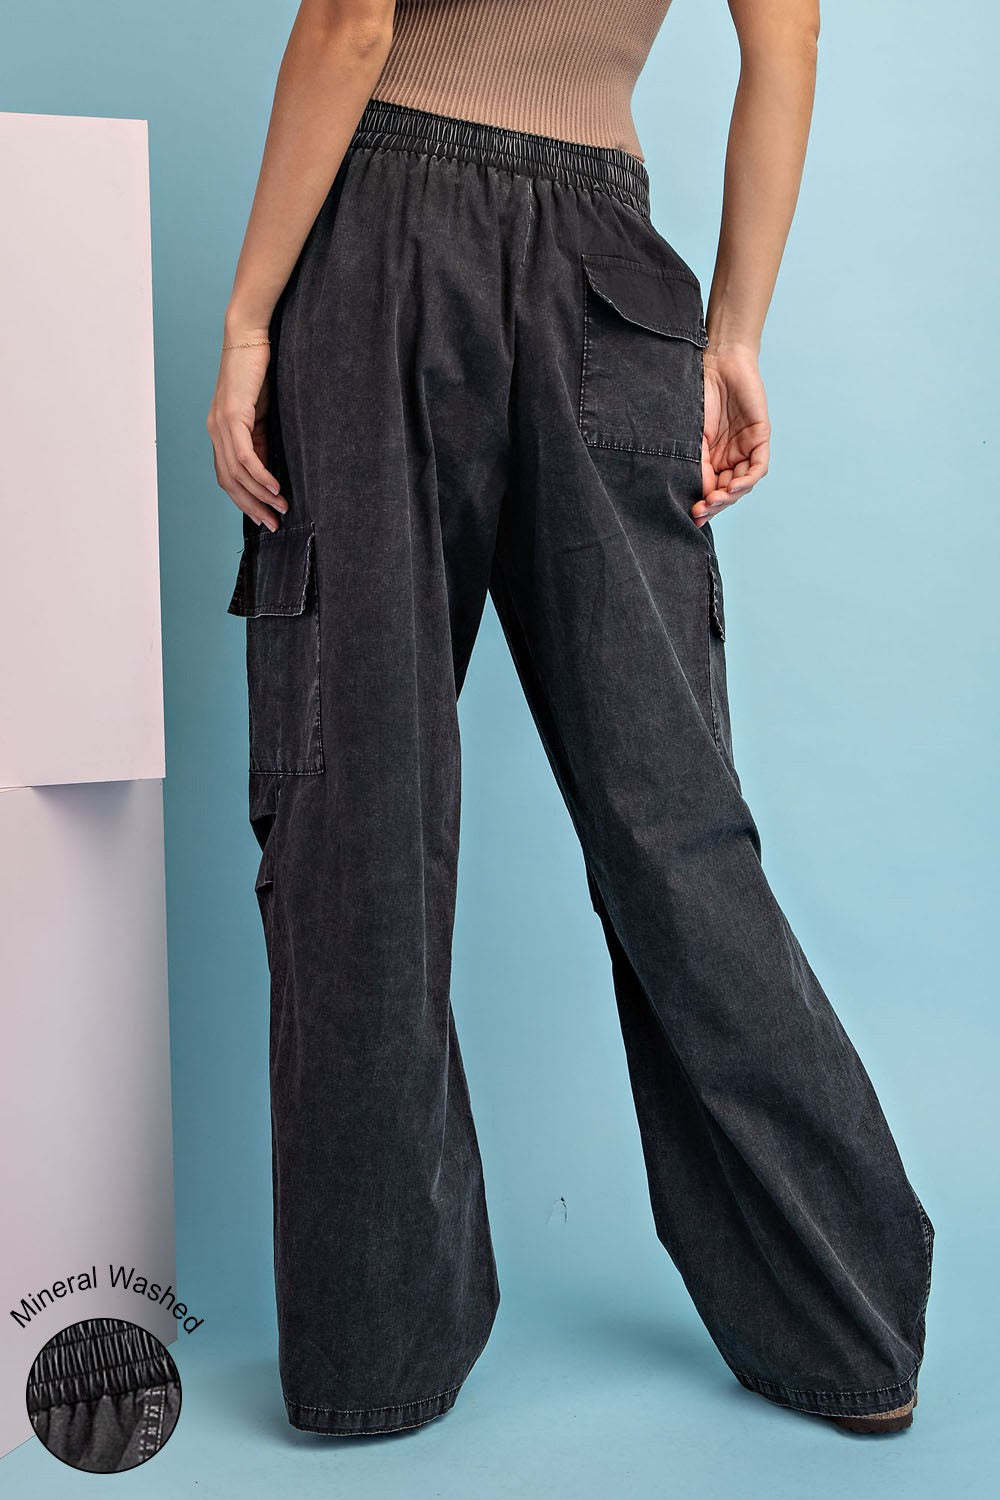 Mineral Washed Straight Leg Pants